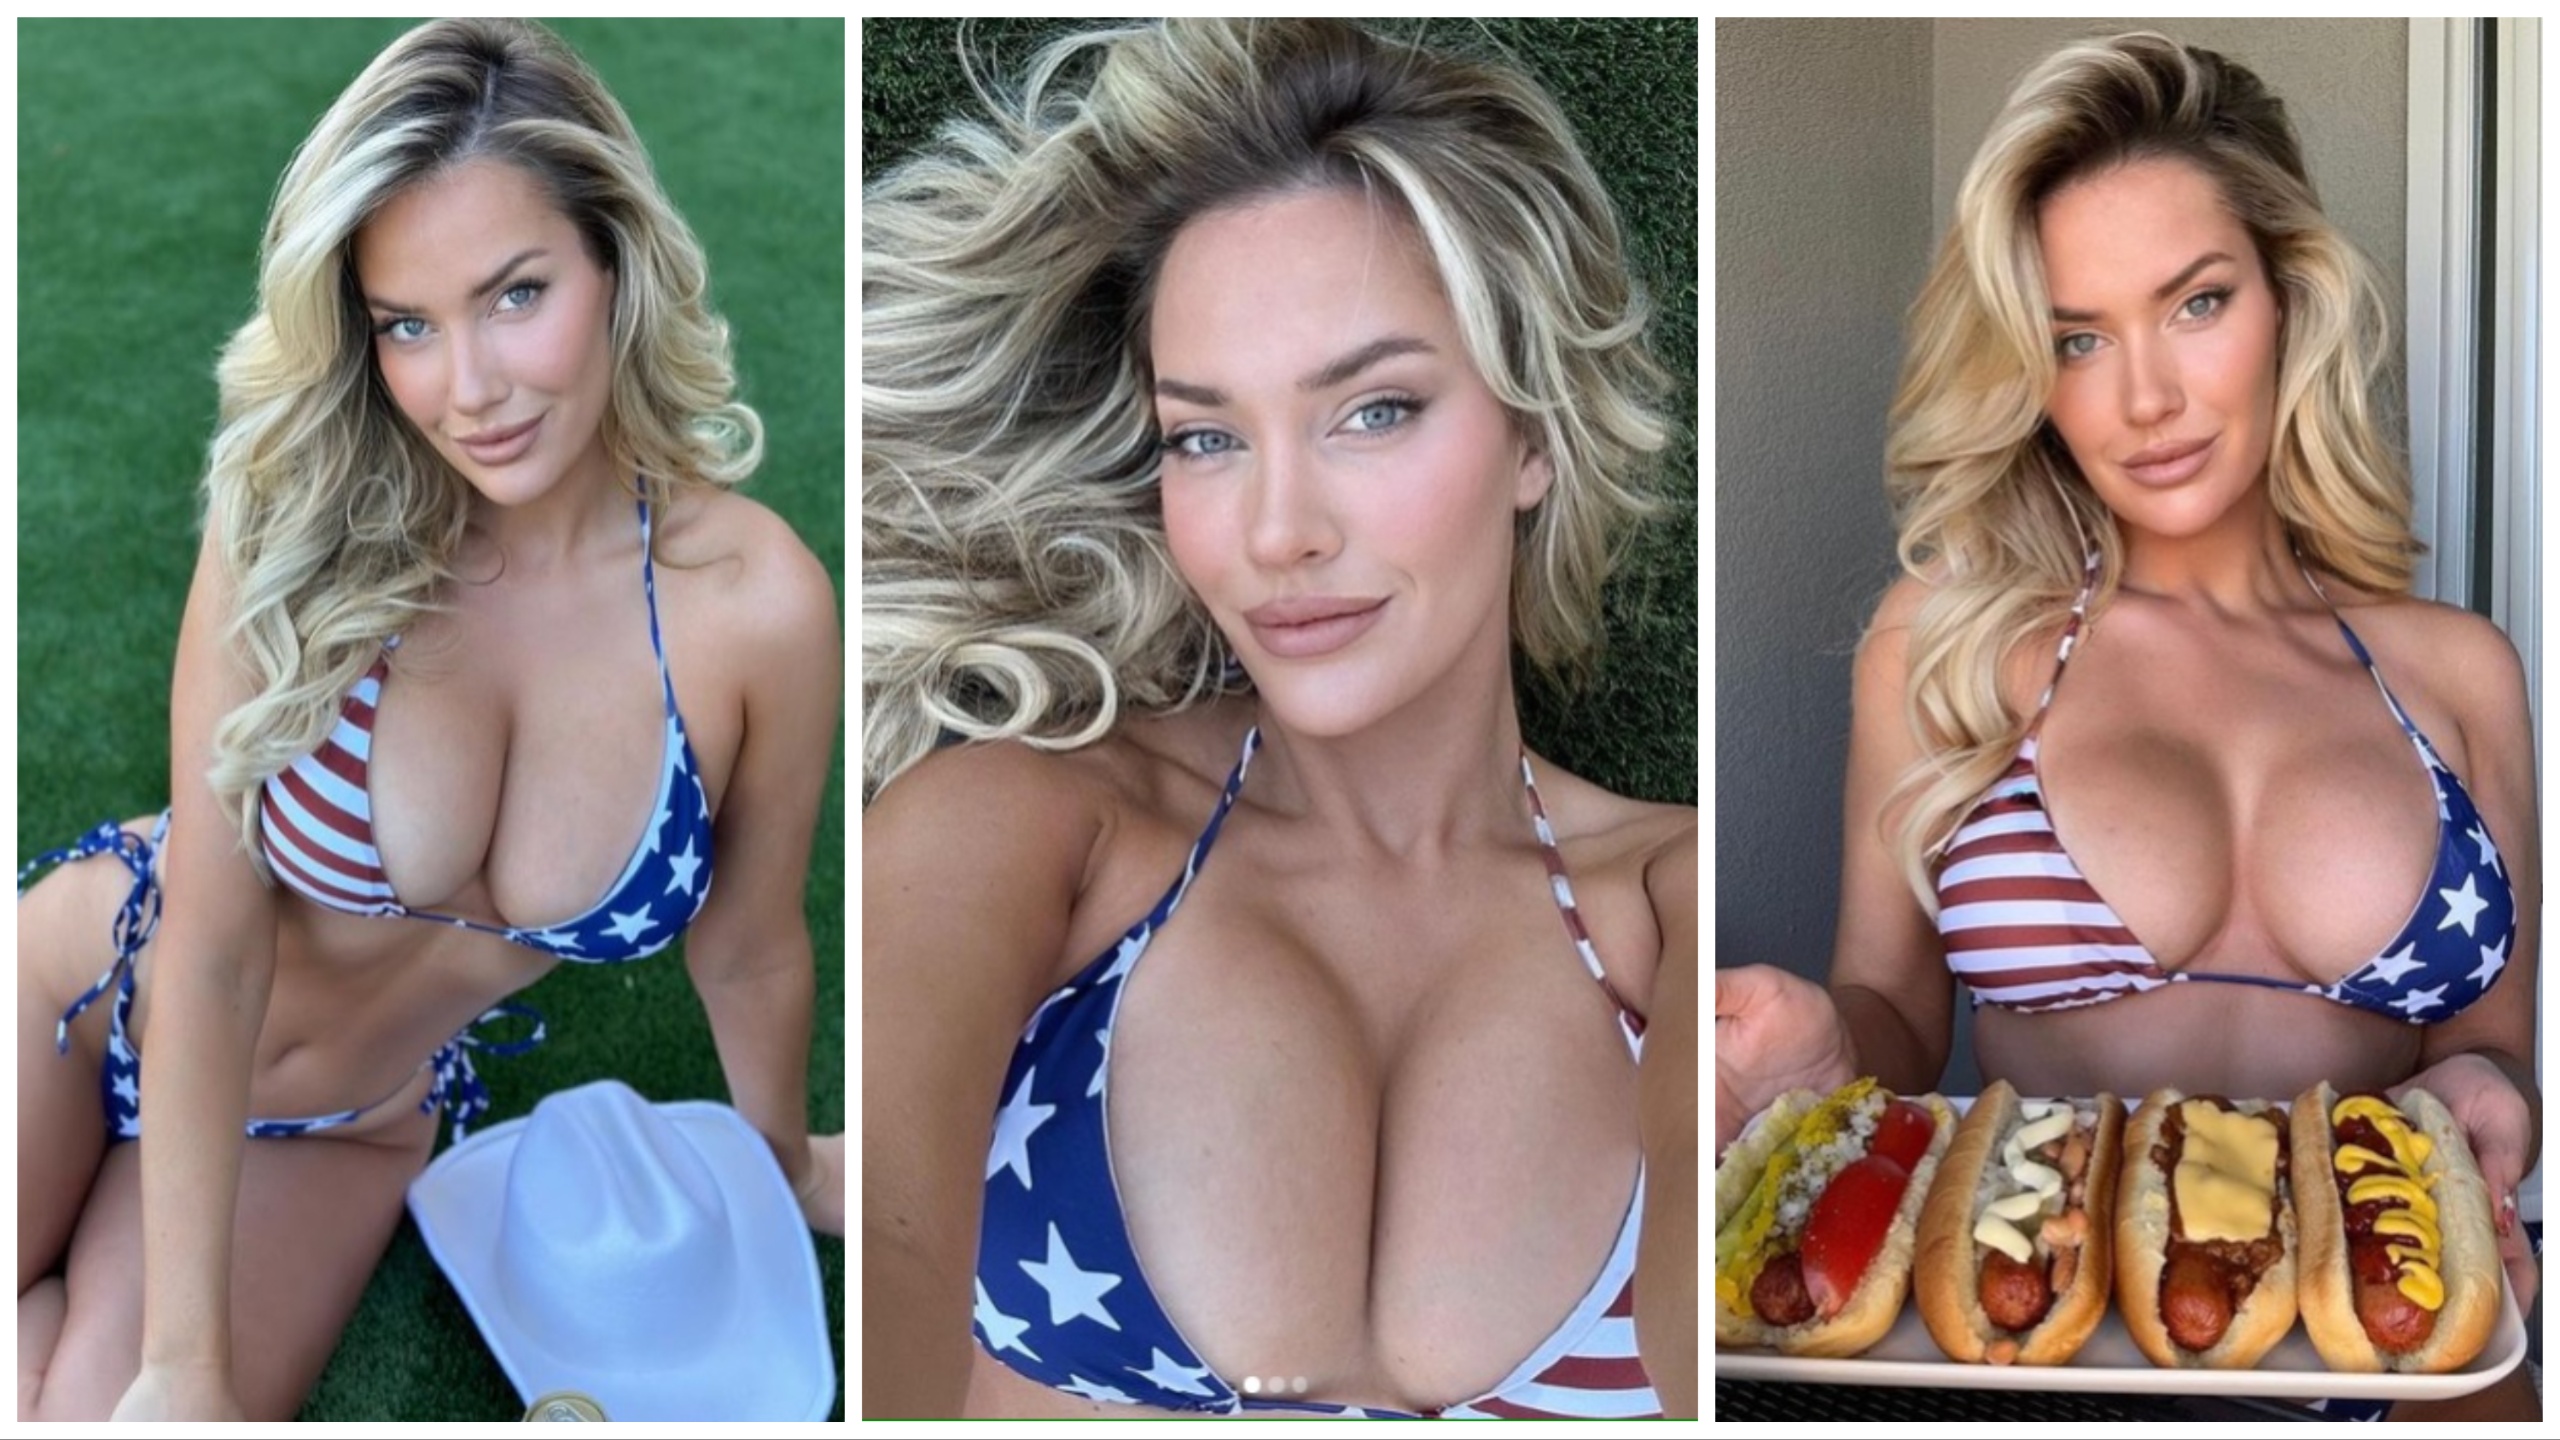 Paige Spiranac goes ALL OUT (with hot dogs!) to celebrate Independence Day GolfMagic